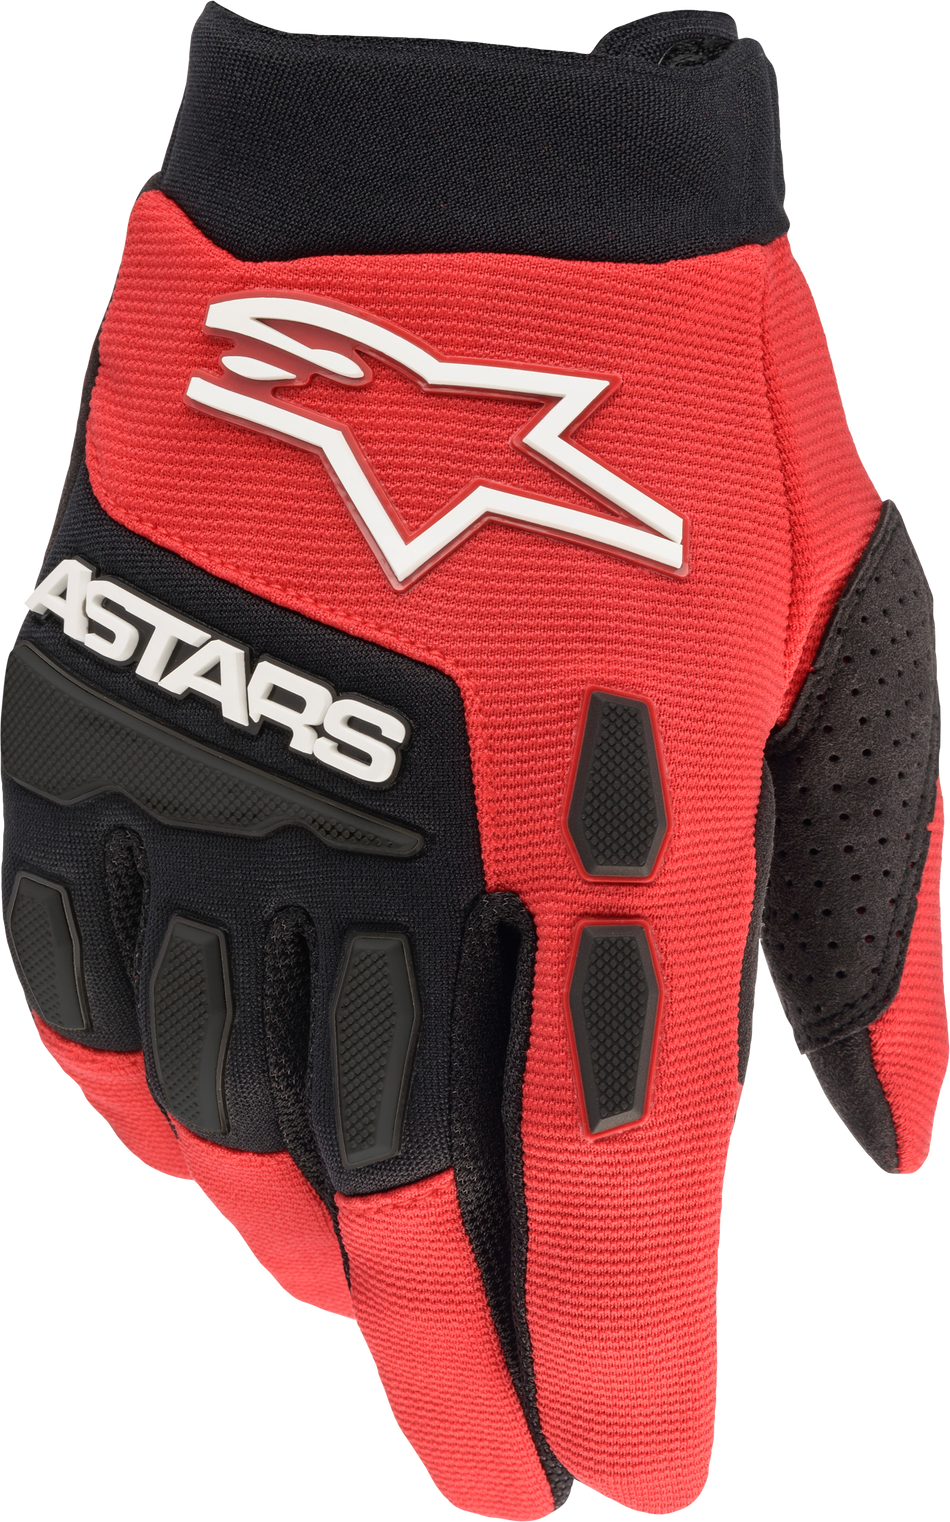 ALPINESTARS Youth & Kids Full Bore Gloves Bright Red/Black Y2xs 3543622-3031-2XS